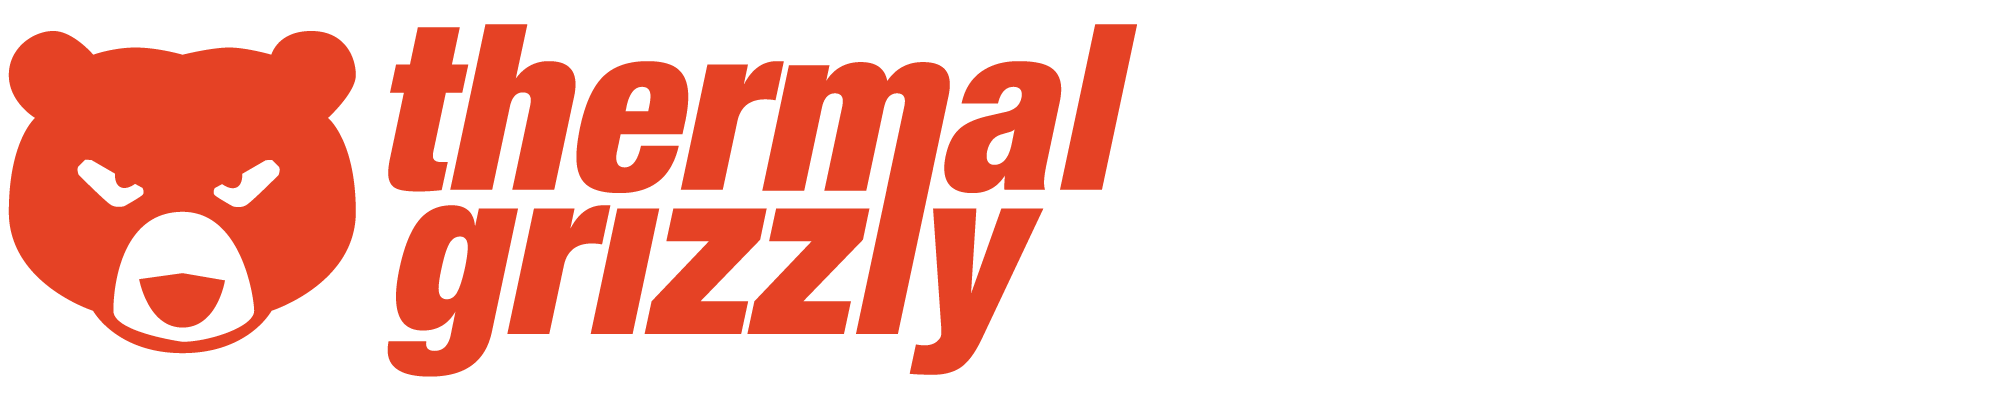 www.thermal-grizzly.com